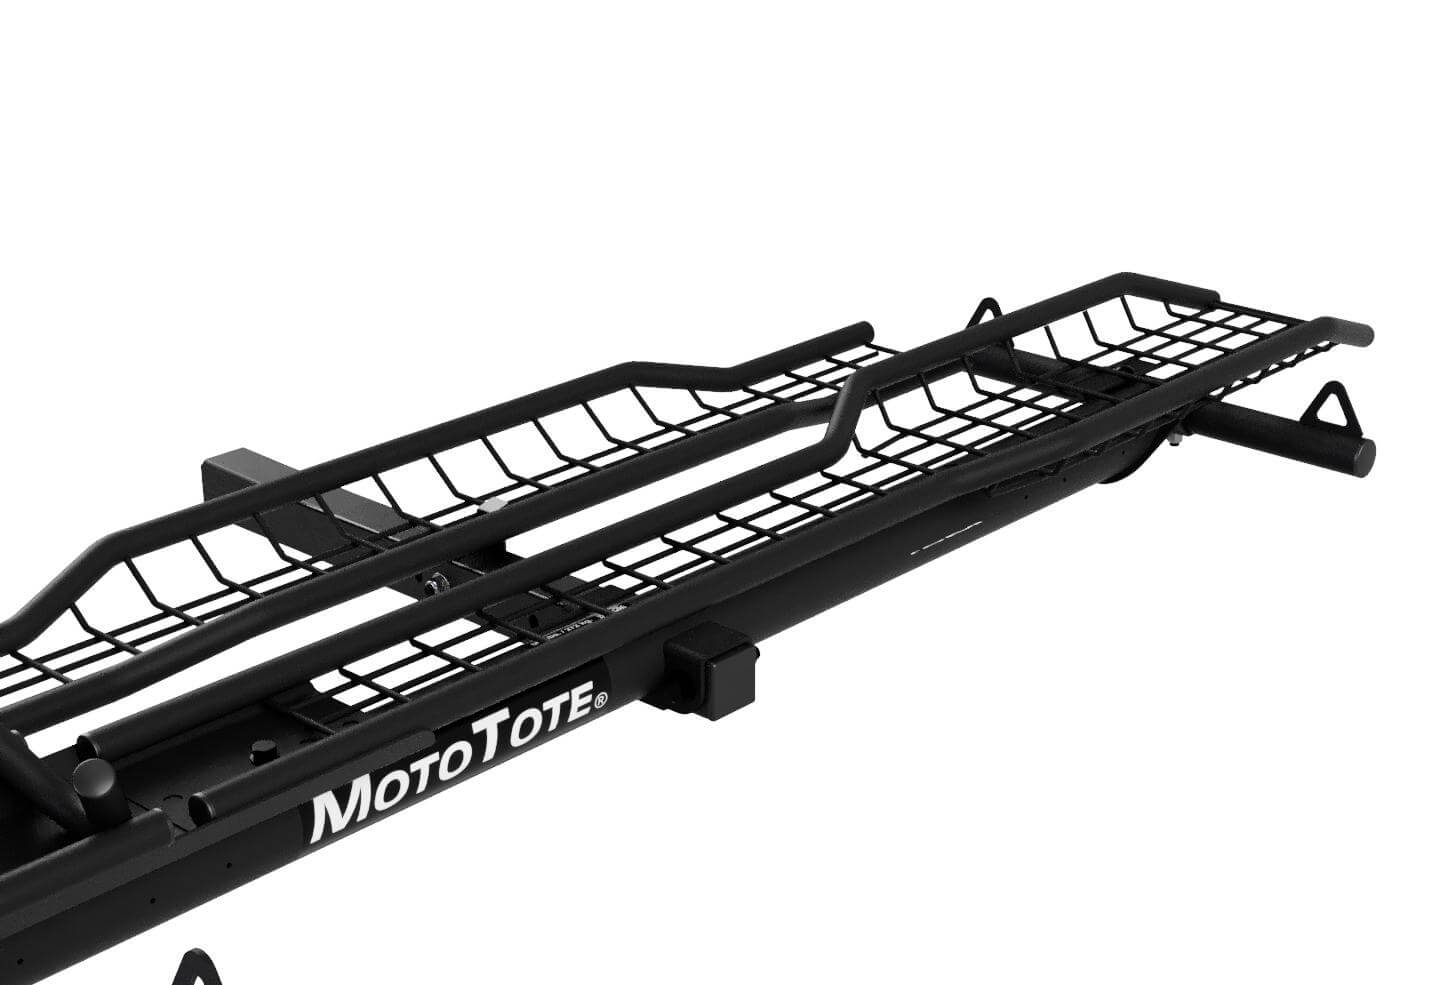 MotoTote Sport Motorcycle Hitch Carrier - WebGrip Tire Track